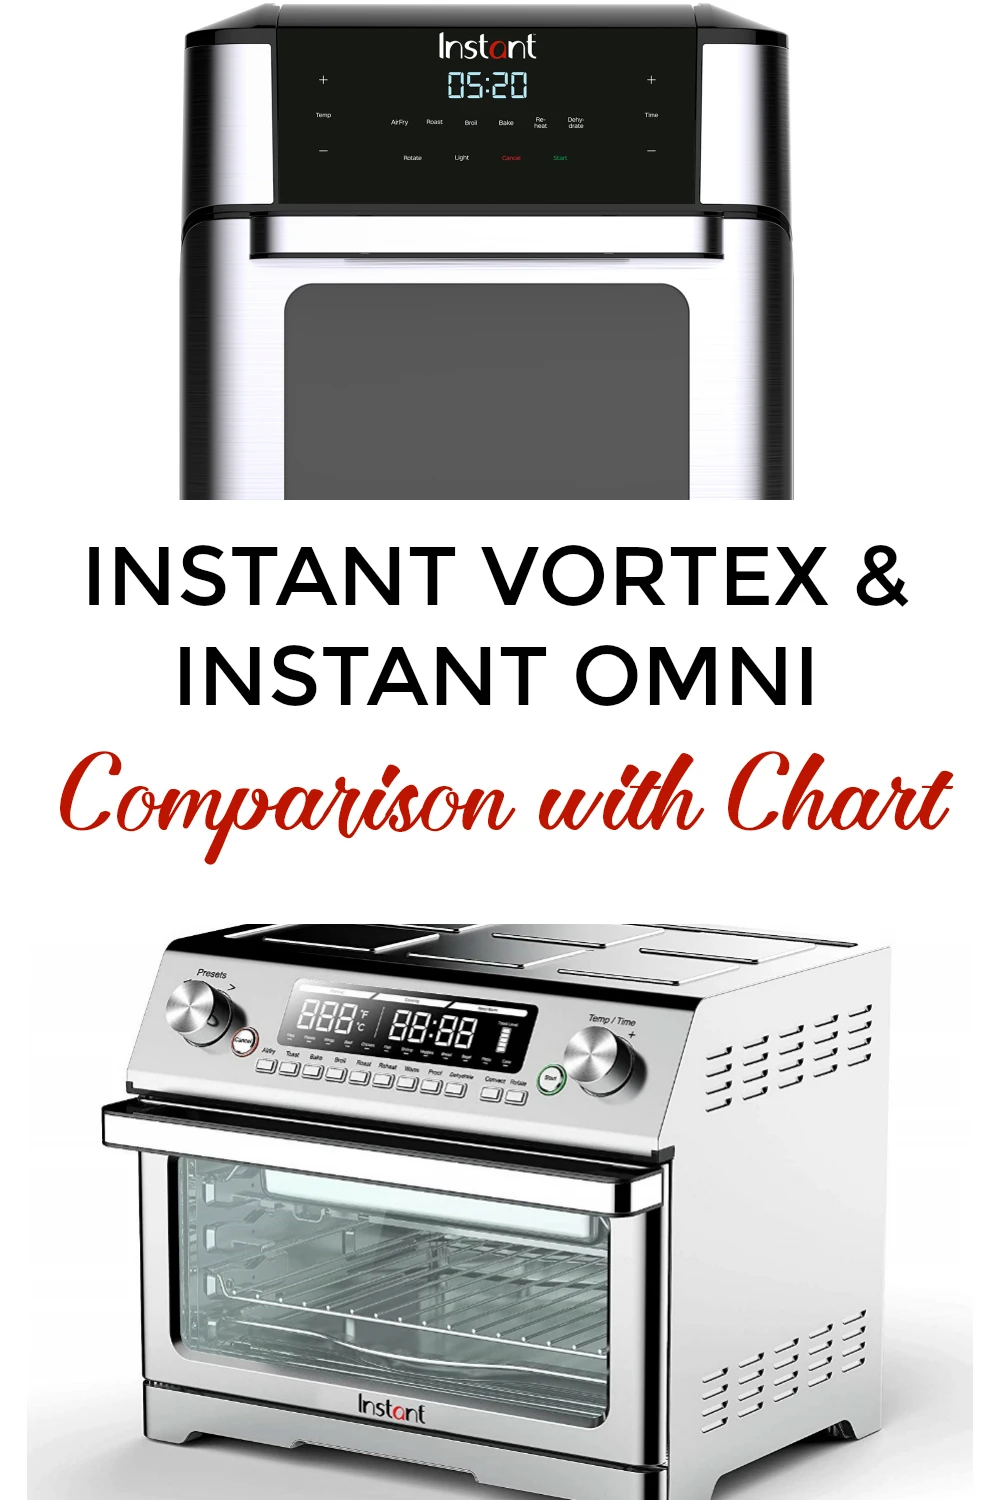 Instant Vortex and Instant Omni Comparison with Chart